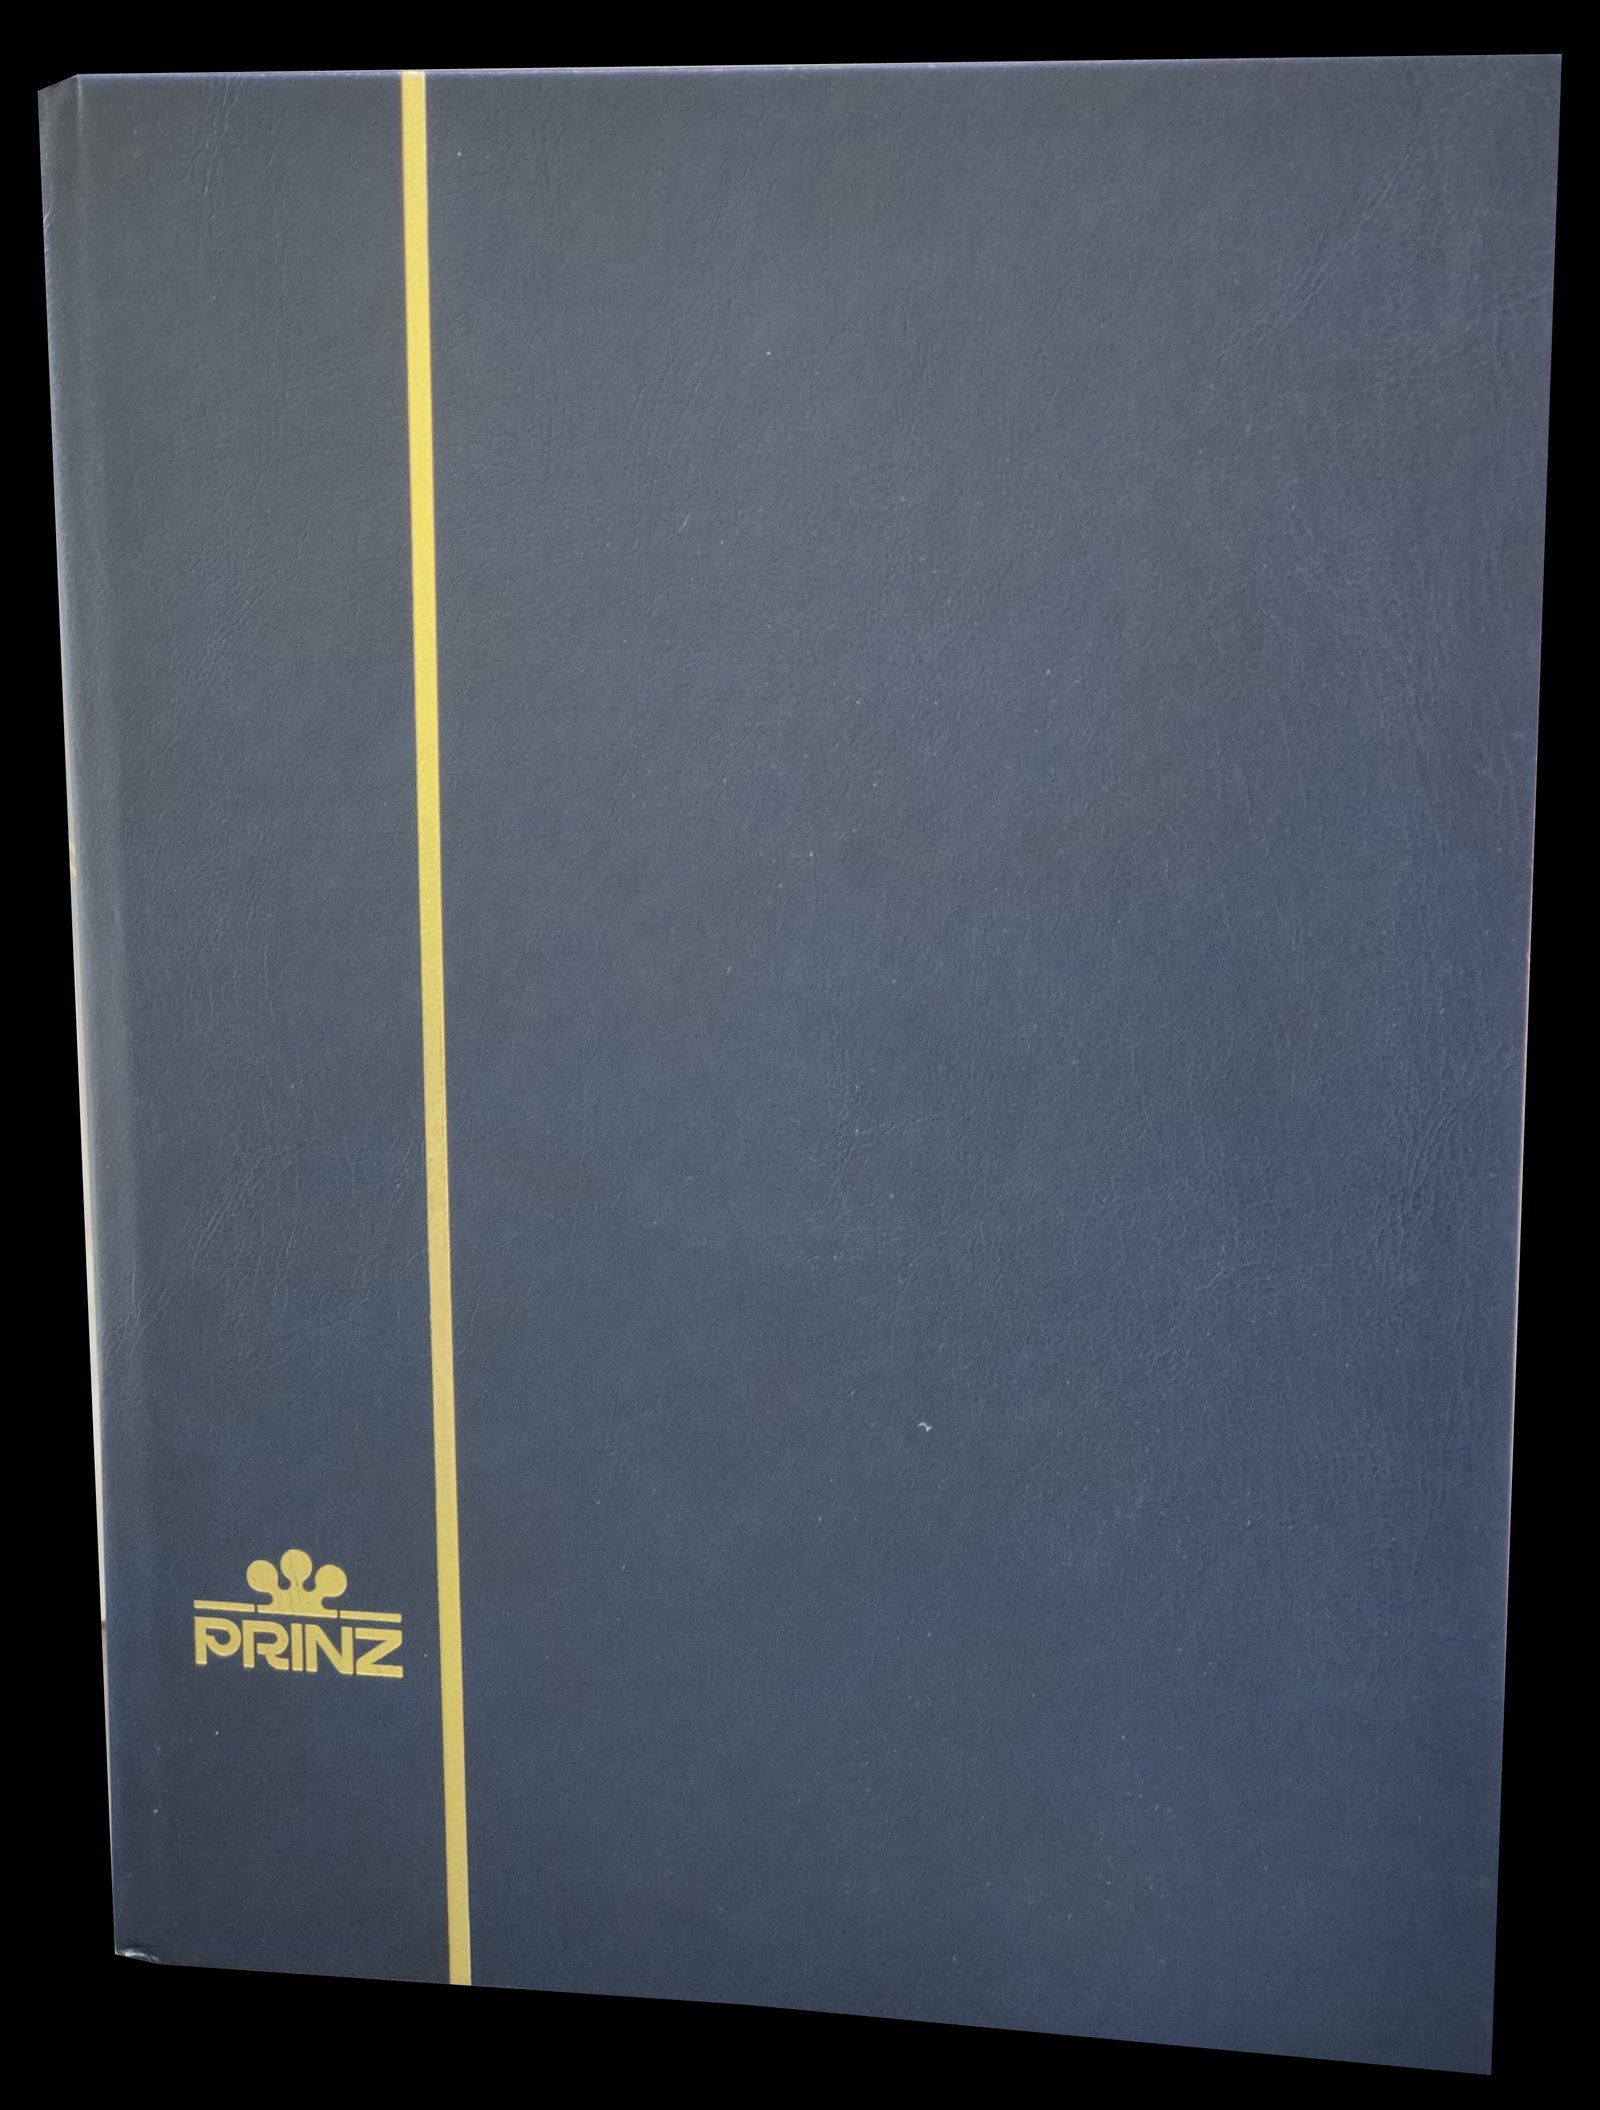 Prinz Classic Stockbook (Stamp Album), 16 White Pages (8 Sheets), A4 Size, Item No. 2008, Made In Germany